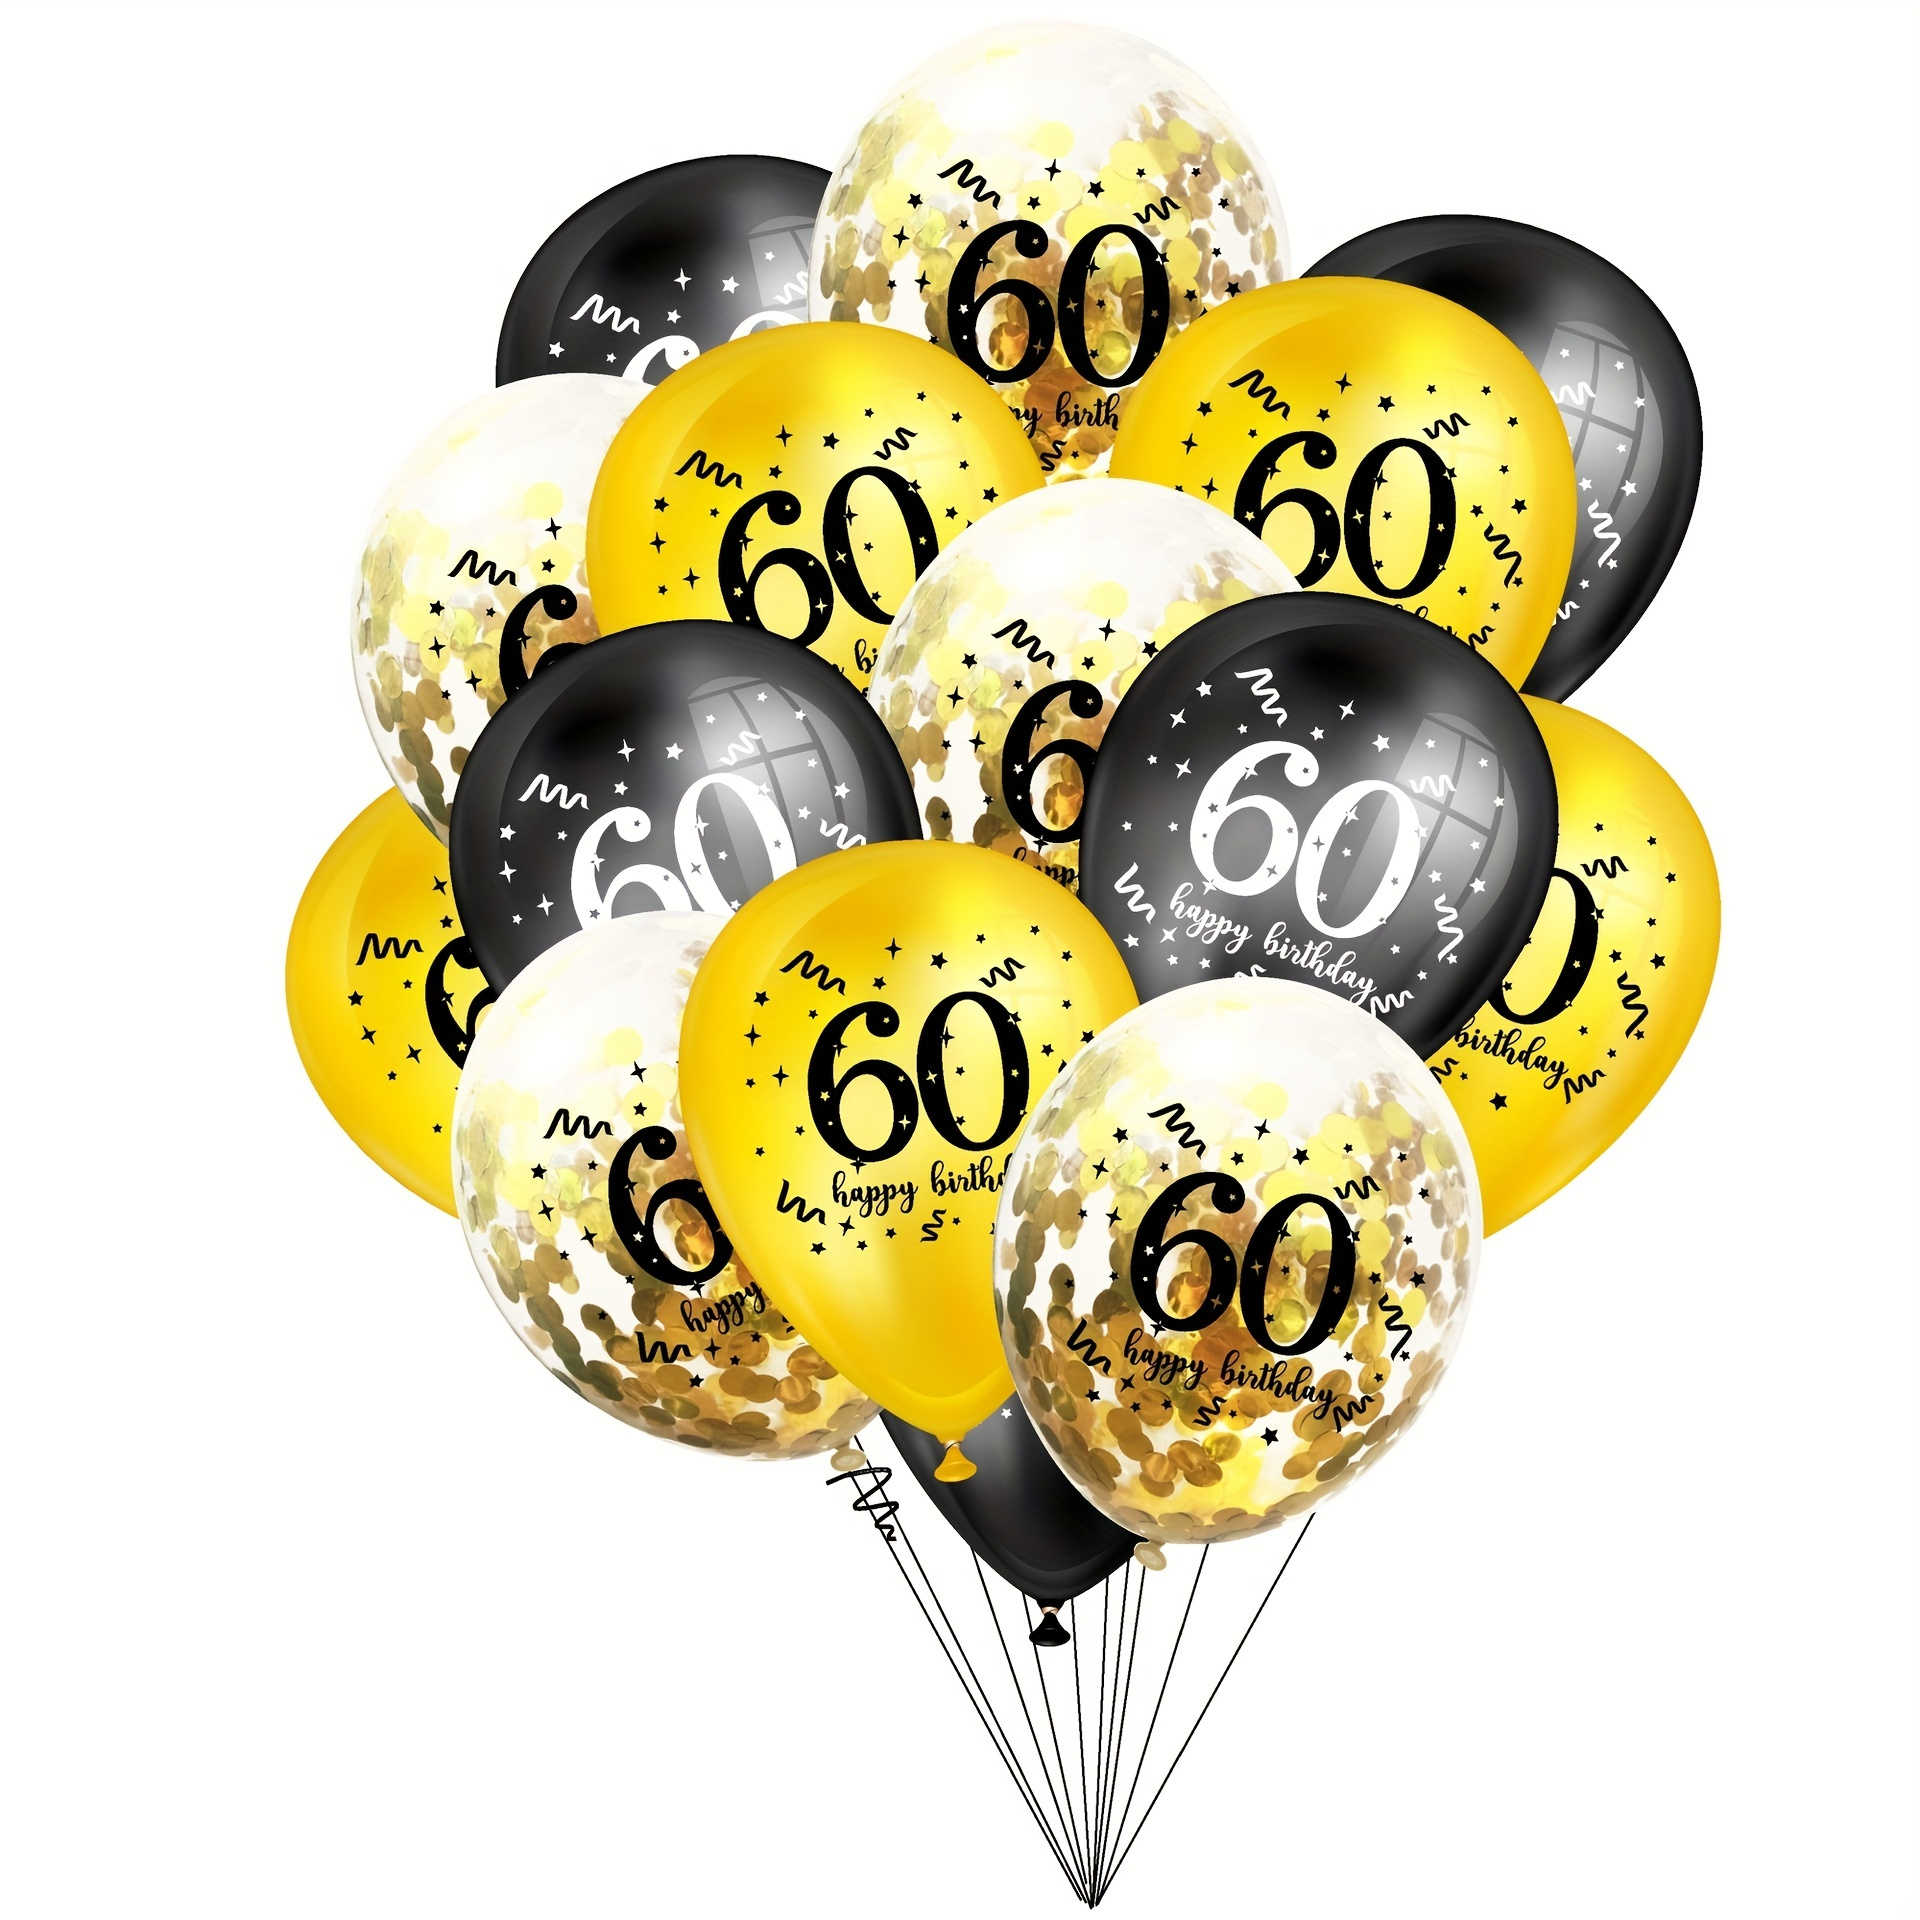 

10pcs Black Golden Balloon Happy Birthday Number Balloon Set Perfect For 50th 60th Birthday Party Decorations Anniversary Celebration Decor Indoor Outdoor Decor